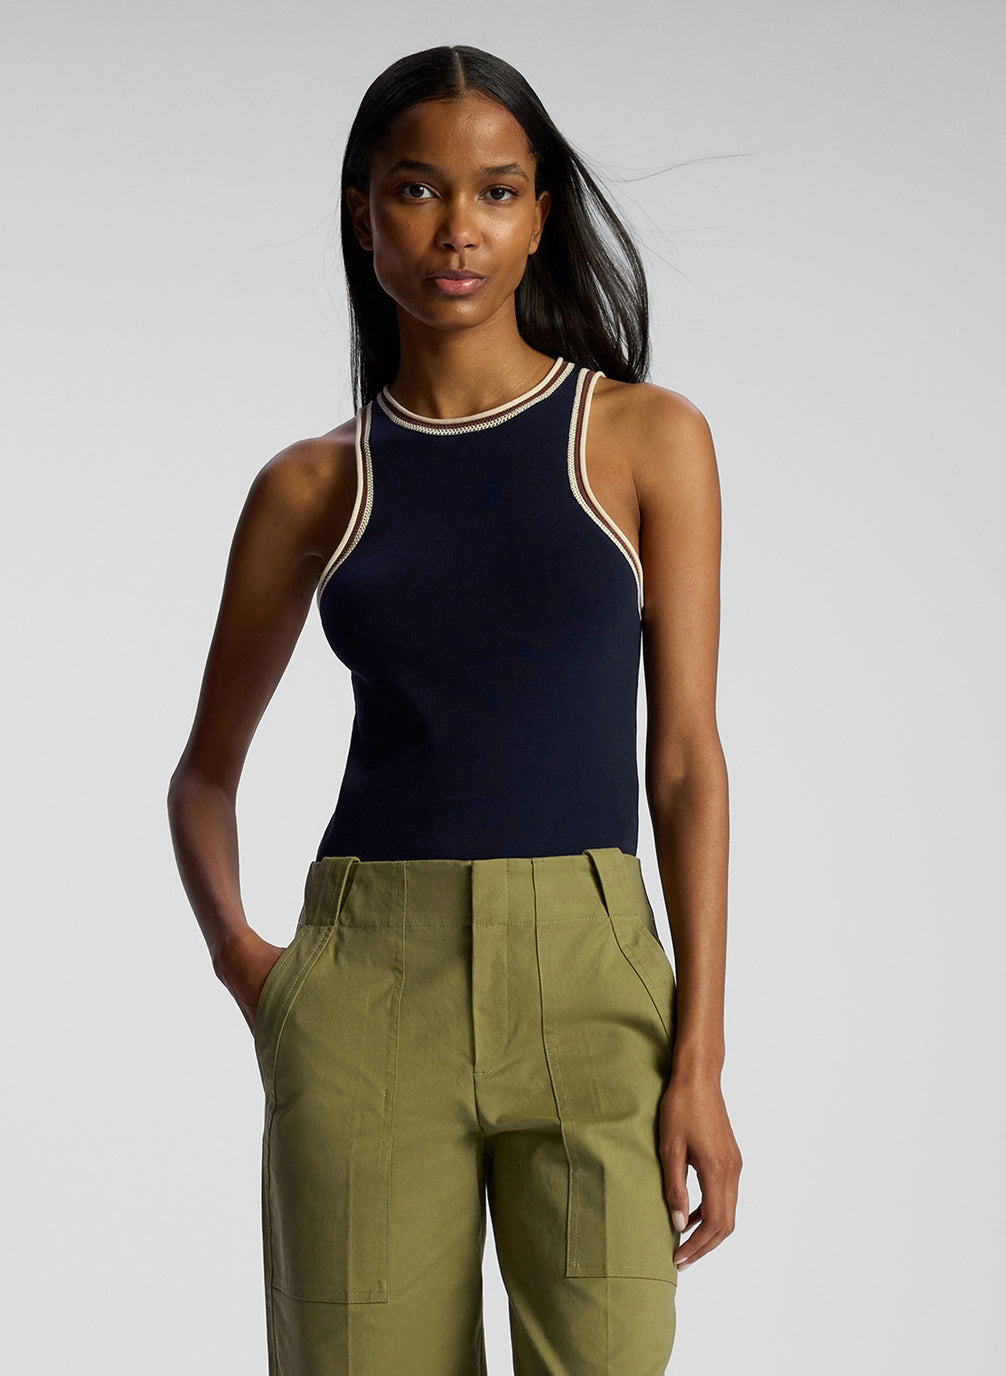 front view of woman wearing navy blue tank top and olive green pants